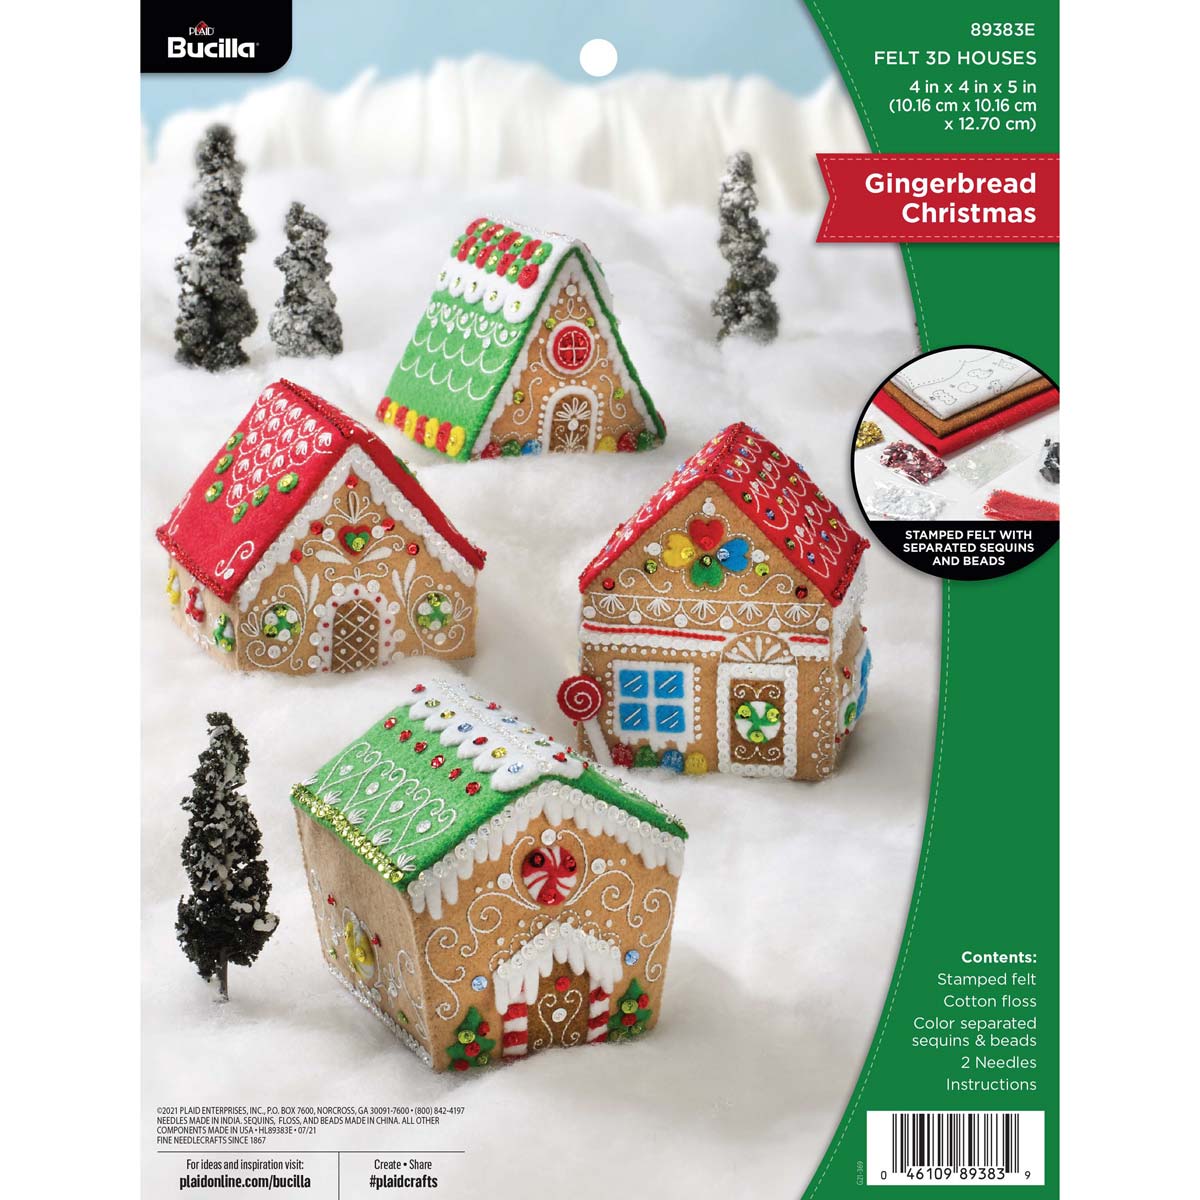 Premium Classic Gingerbread Chateau Kit – Garden Streets